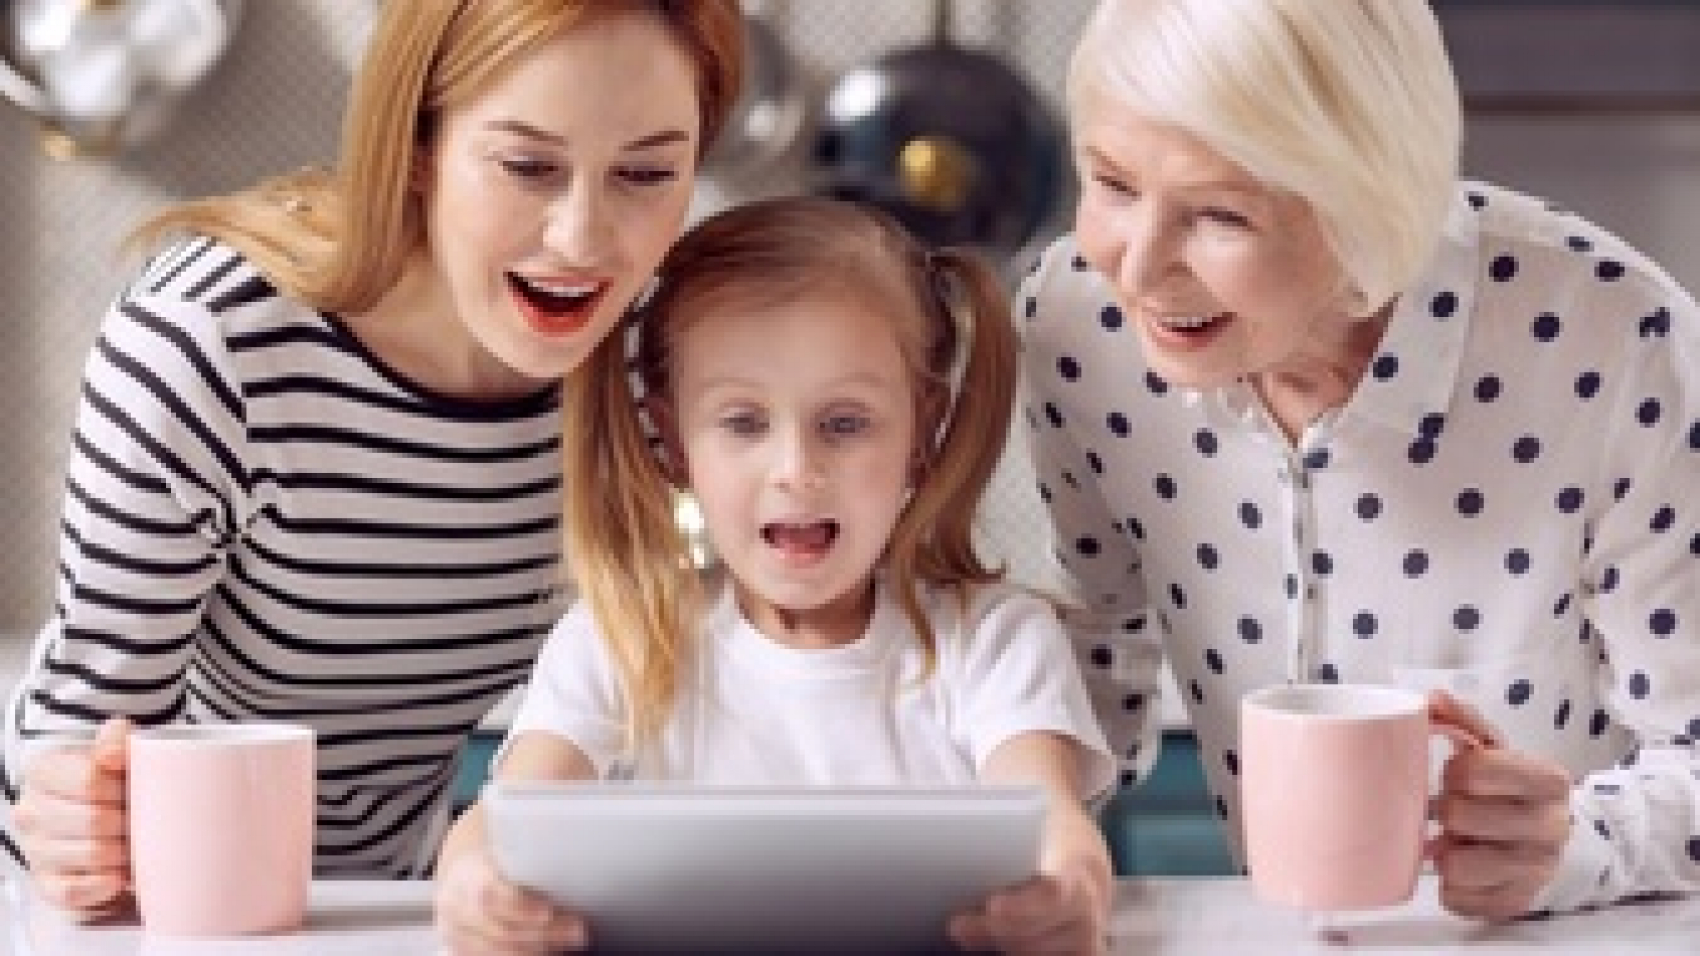 exciting-cartoon-pleasant-little-girl-watching-a-cartoon-on-tablet-together-with-her-grandmother-and-mother-drinking-coffee-from-pink-mugs-while-looking-amused-by-plot-twists_259150-25392